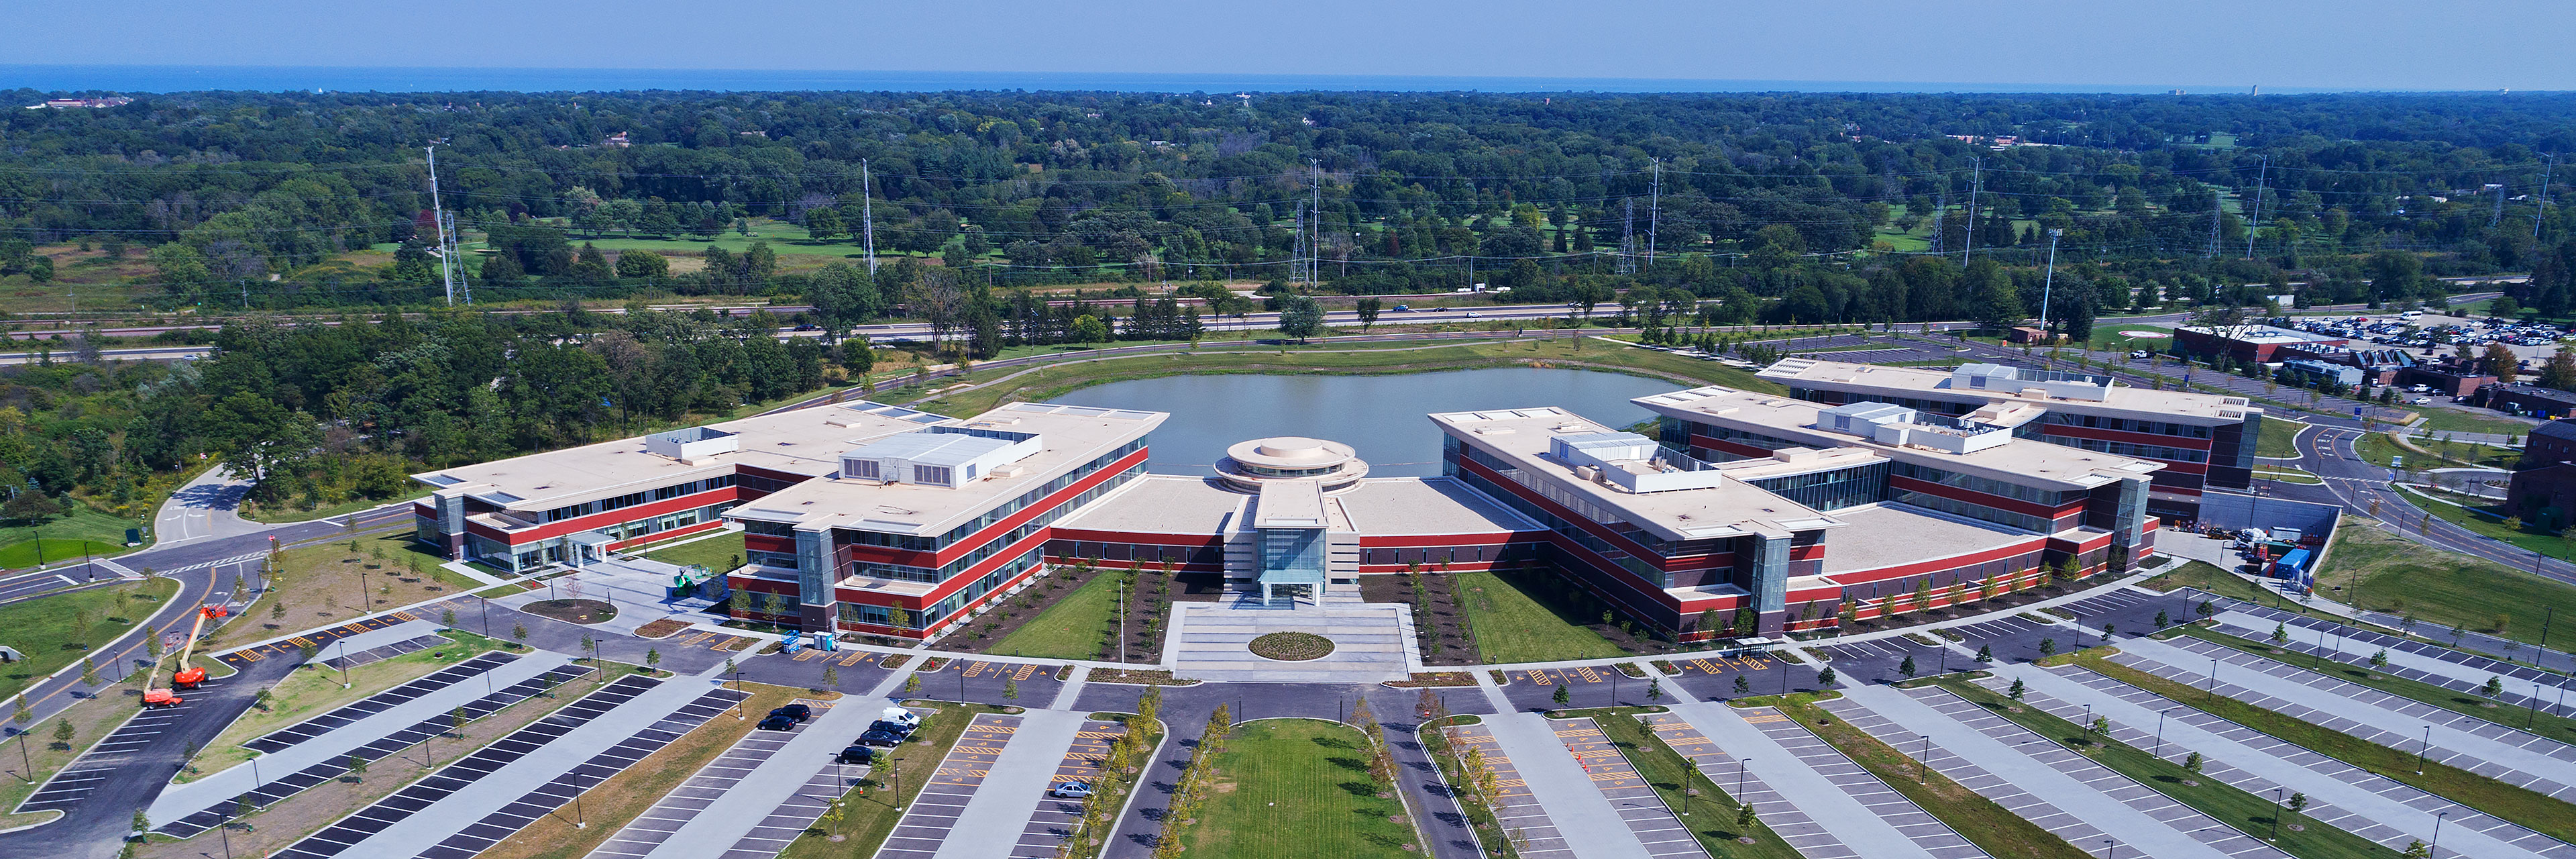 Lake Forest Hospital captured by Jacob Rosenfeld for Unmanned Pix